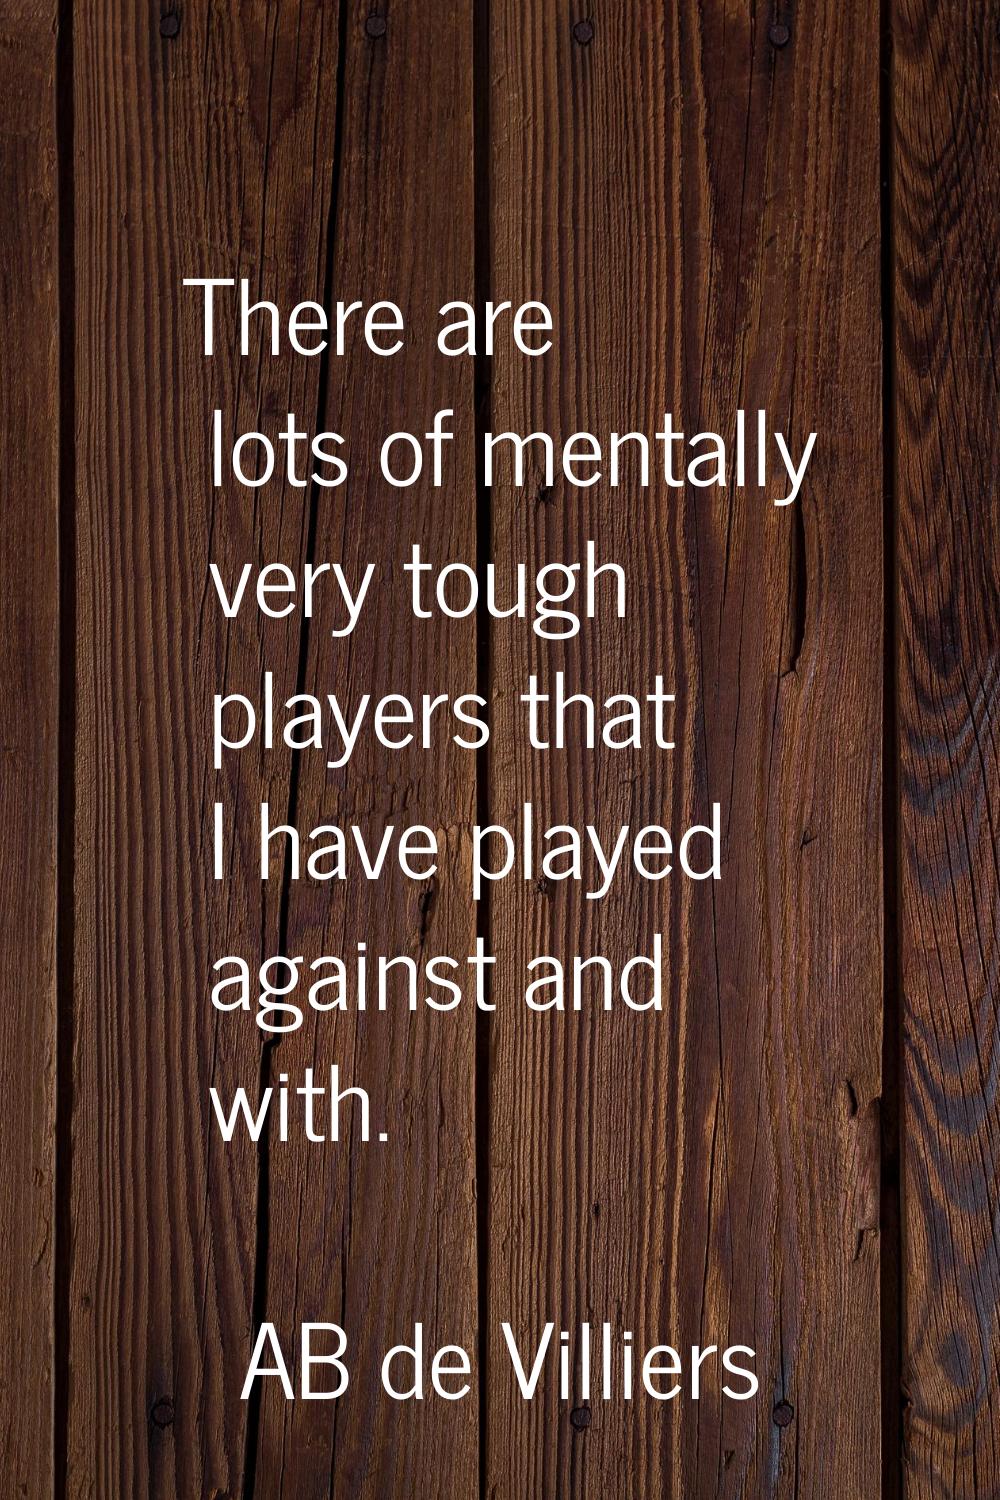 There are lots of mentally very tough players that I have played against and with.